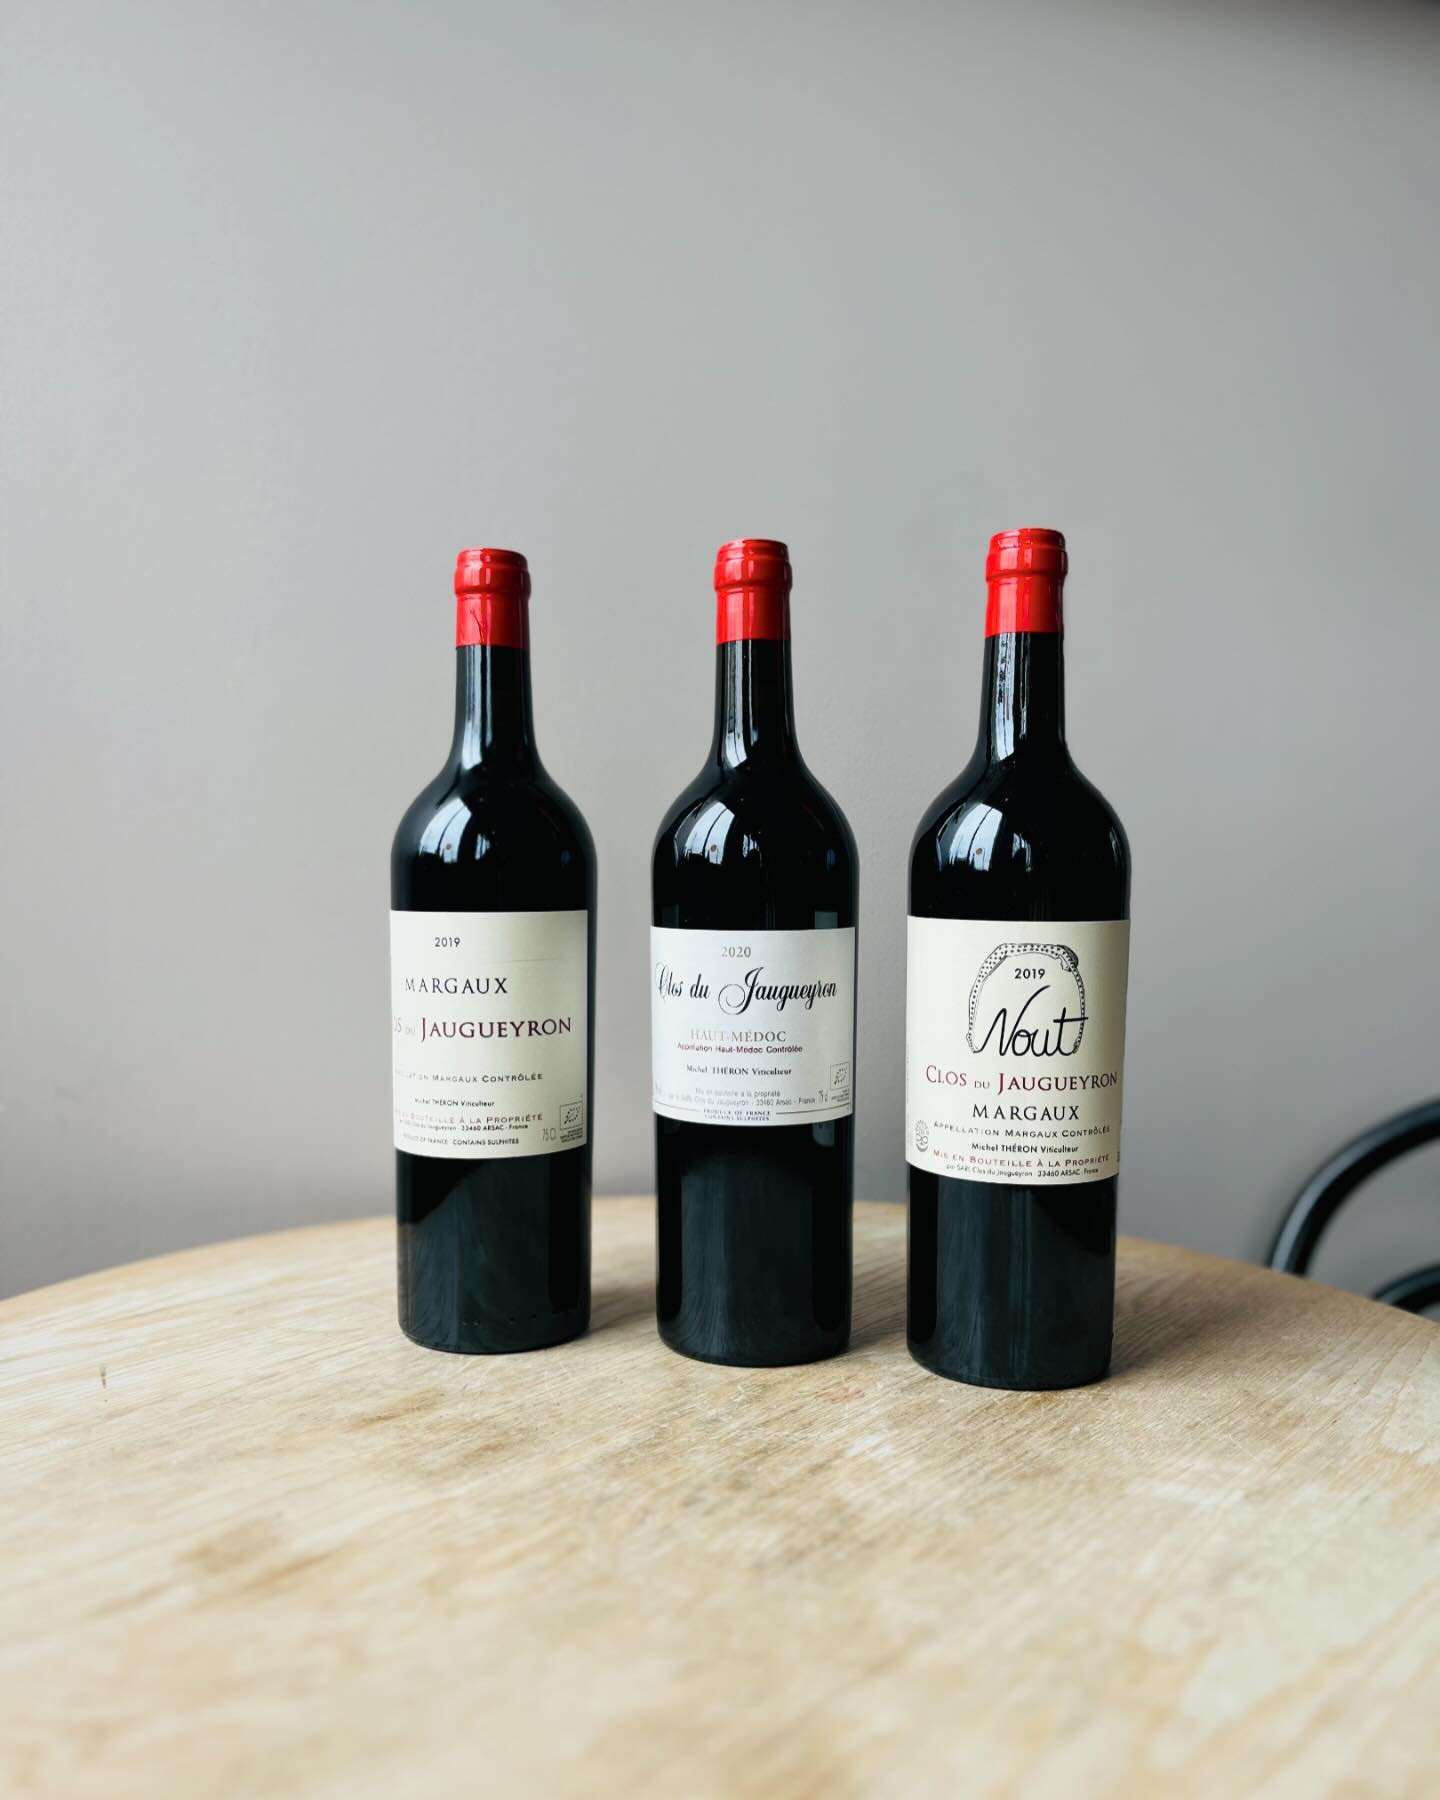 Bordeaux is not a monolith! Beyond the embossed vests, futures trading, and sugar-coated tannins there is a wealth of farmer estates and real, authentic wine. Much of Bordeaux&rsquo;s celebrated revival in the natural wine world is, rightly, focused 